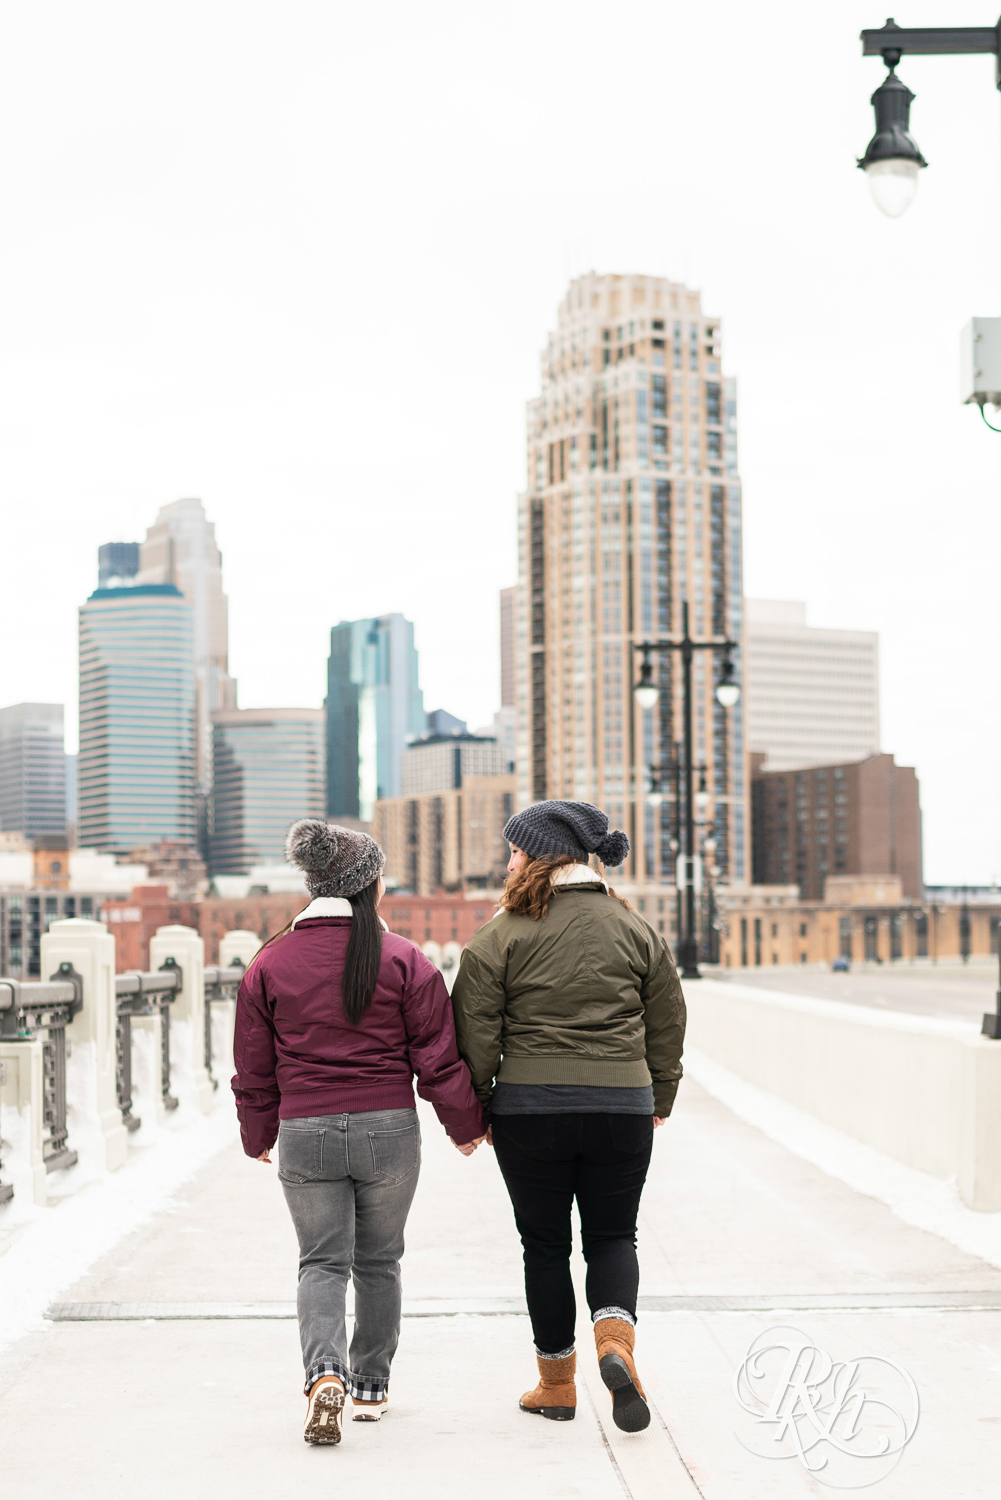 Red headed woman and Asian woman in jackets walk down Third Street Bridge during winter engagement photography in Minneapolis, Minnesota.